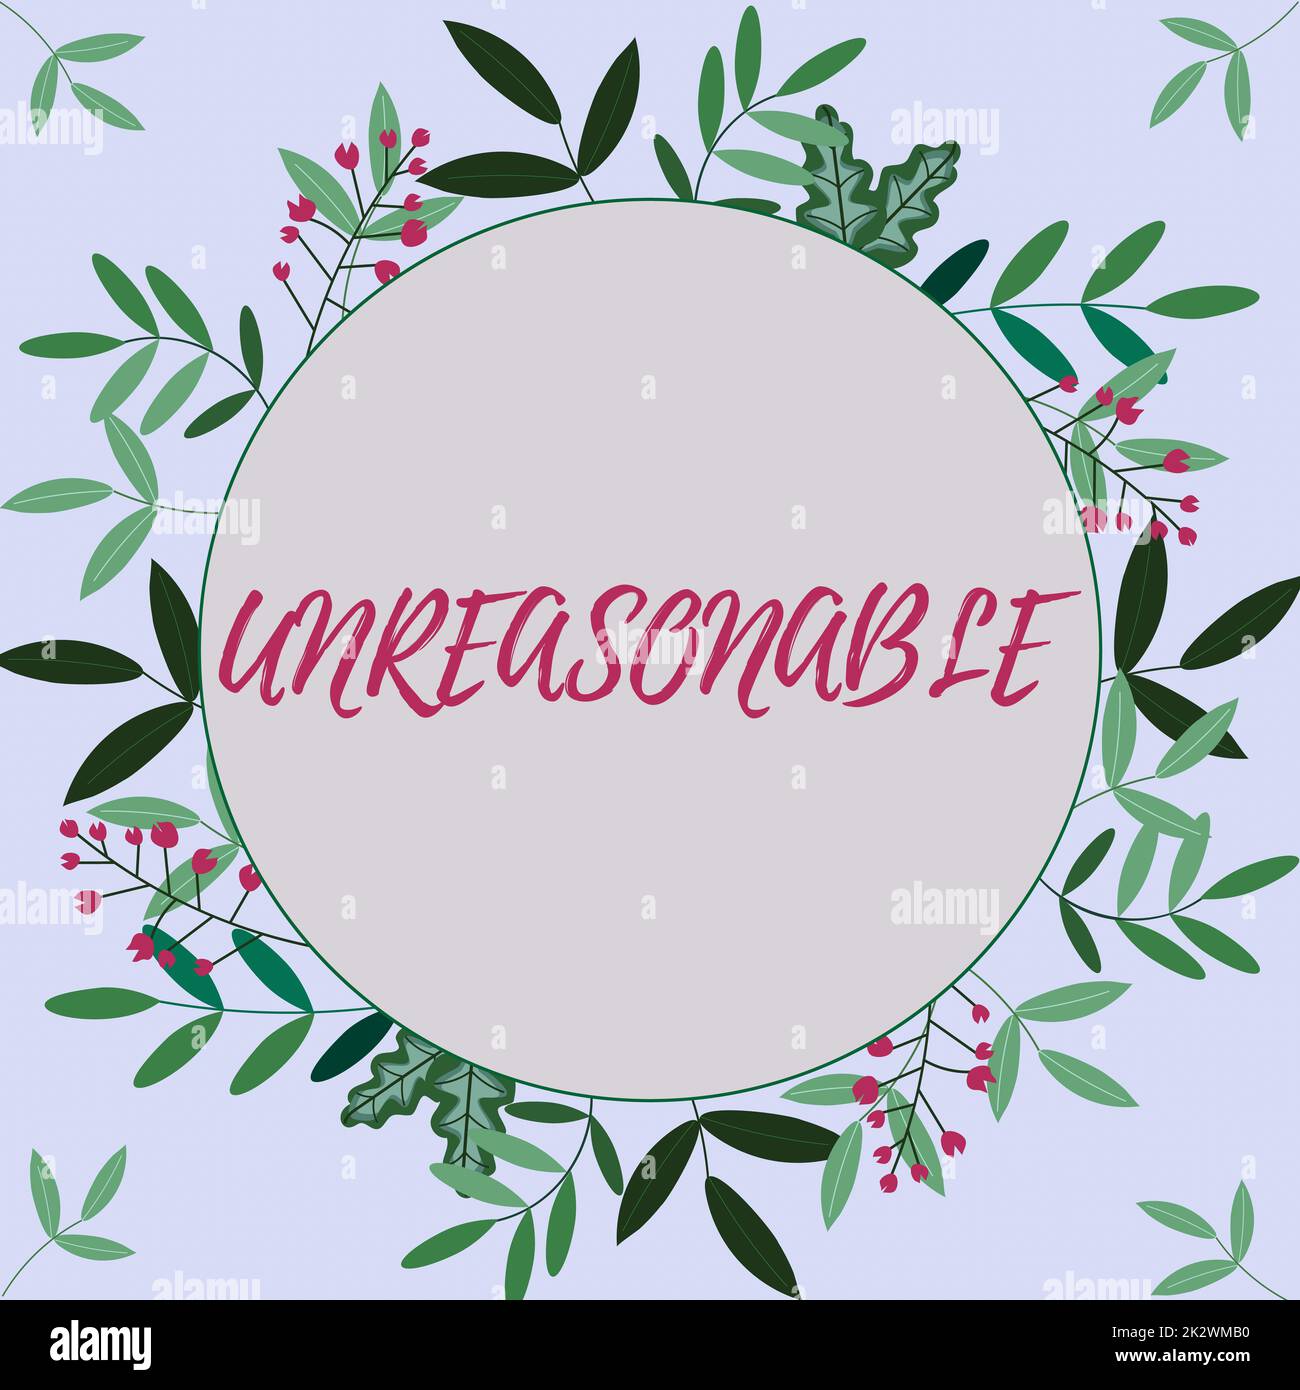 Hand writing sign Unreasonable. Word for Beyond the limits of acceptability or fairness Inappropriate Frame Decorated With Colorful Flowers And Foliage Arranged Harmoniously. Stock Photo